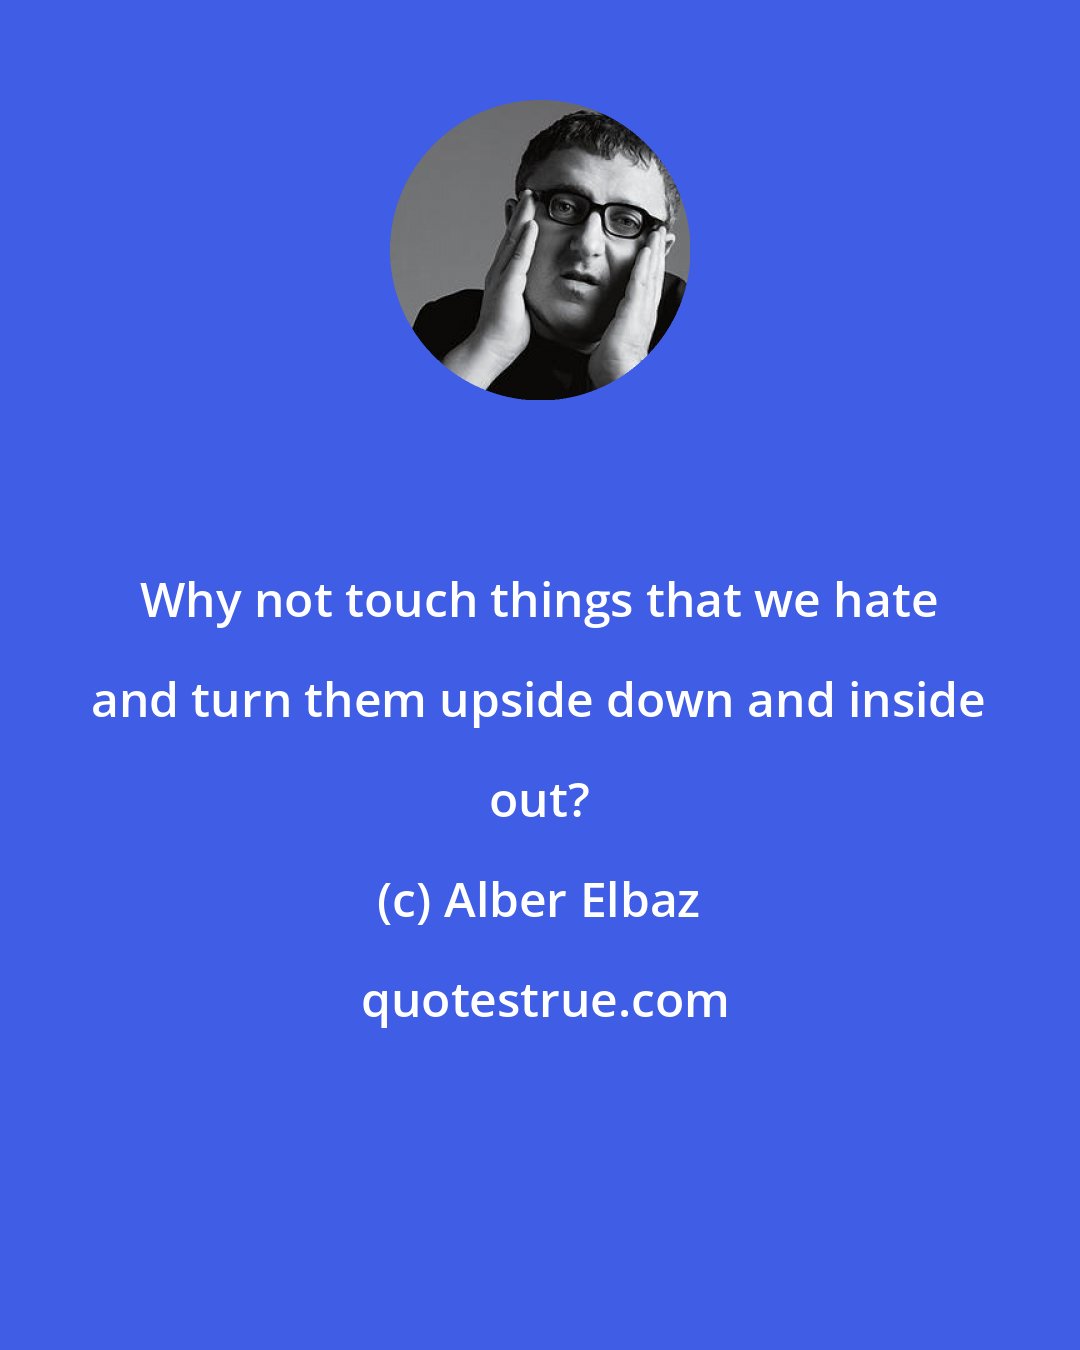 Alber Elbaz: Why not touch things that we hate and turn them upside down and inside out?